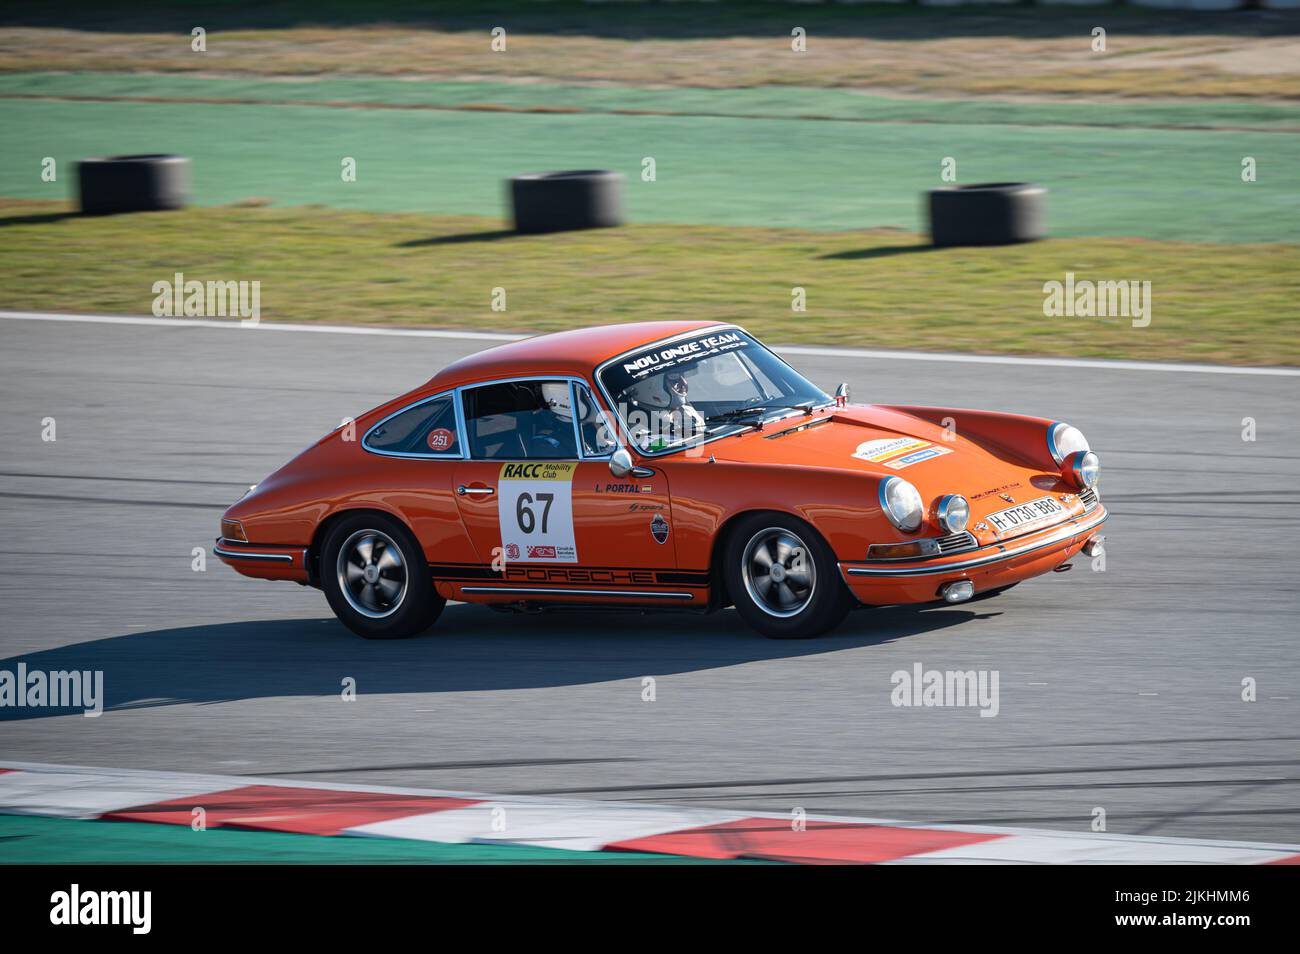 Barcelona, Spain; December 20, 2021: Porsche 911s 2.0 Racing car in the track of Montmelo Stock Photo